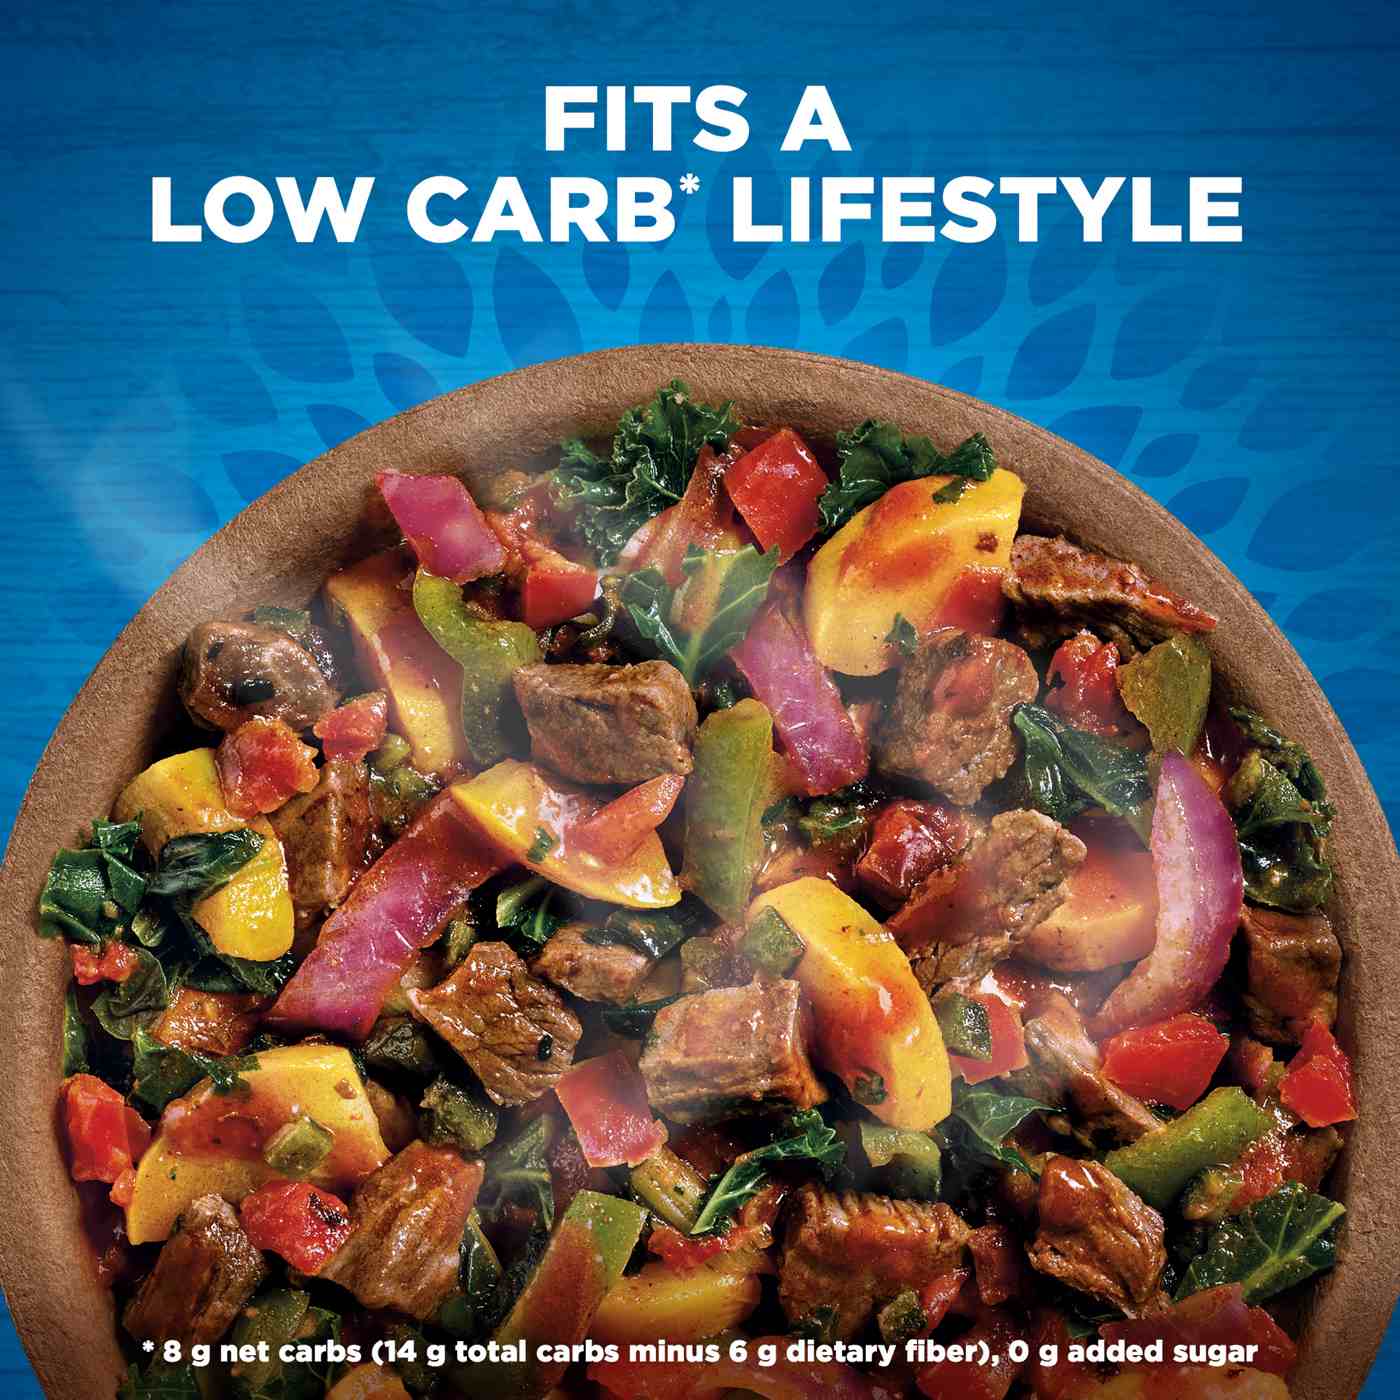 Healthy Choice Zero Low Carb Lifestyle Carne Asada Frozen Meal; image 6 of 7